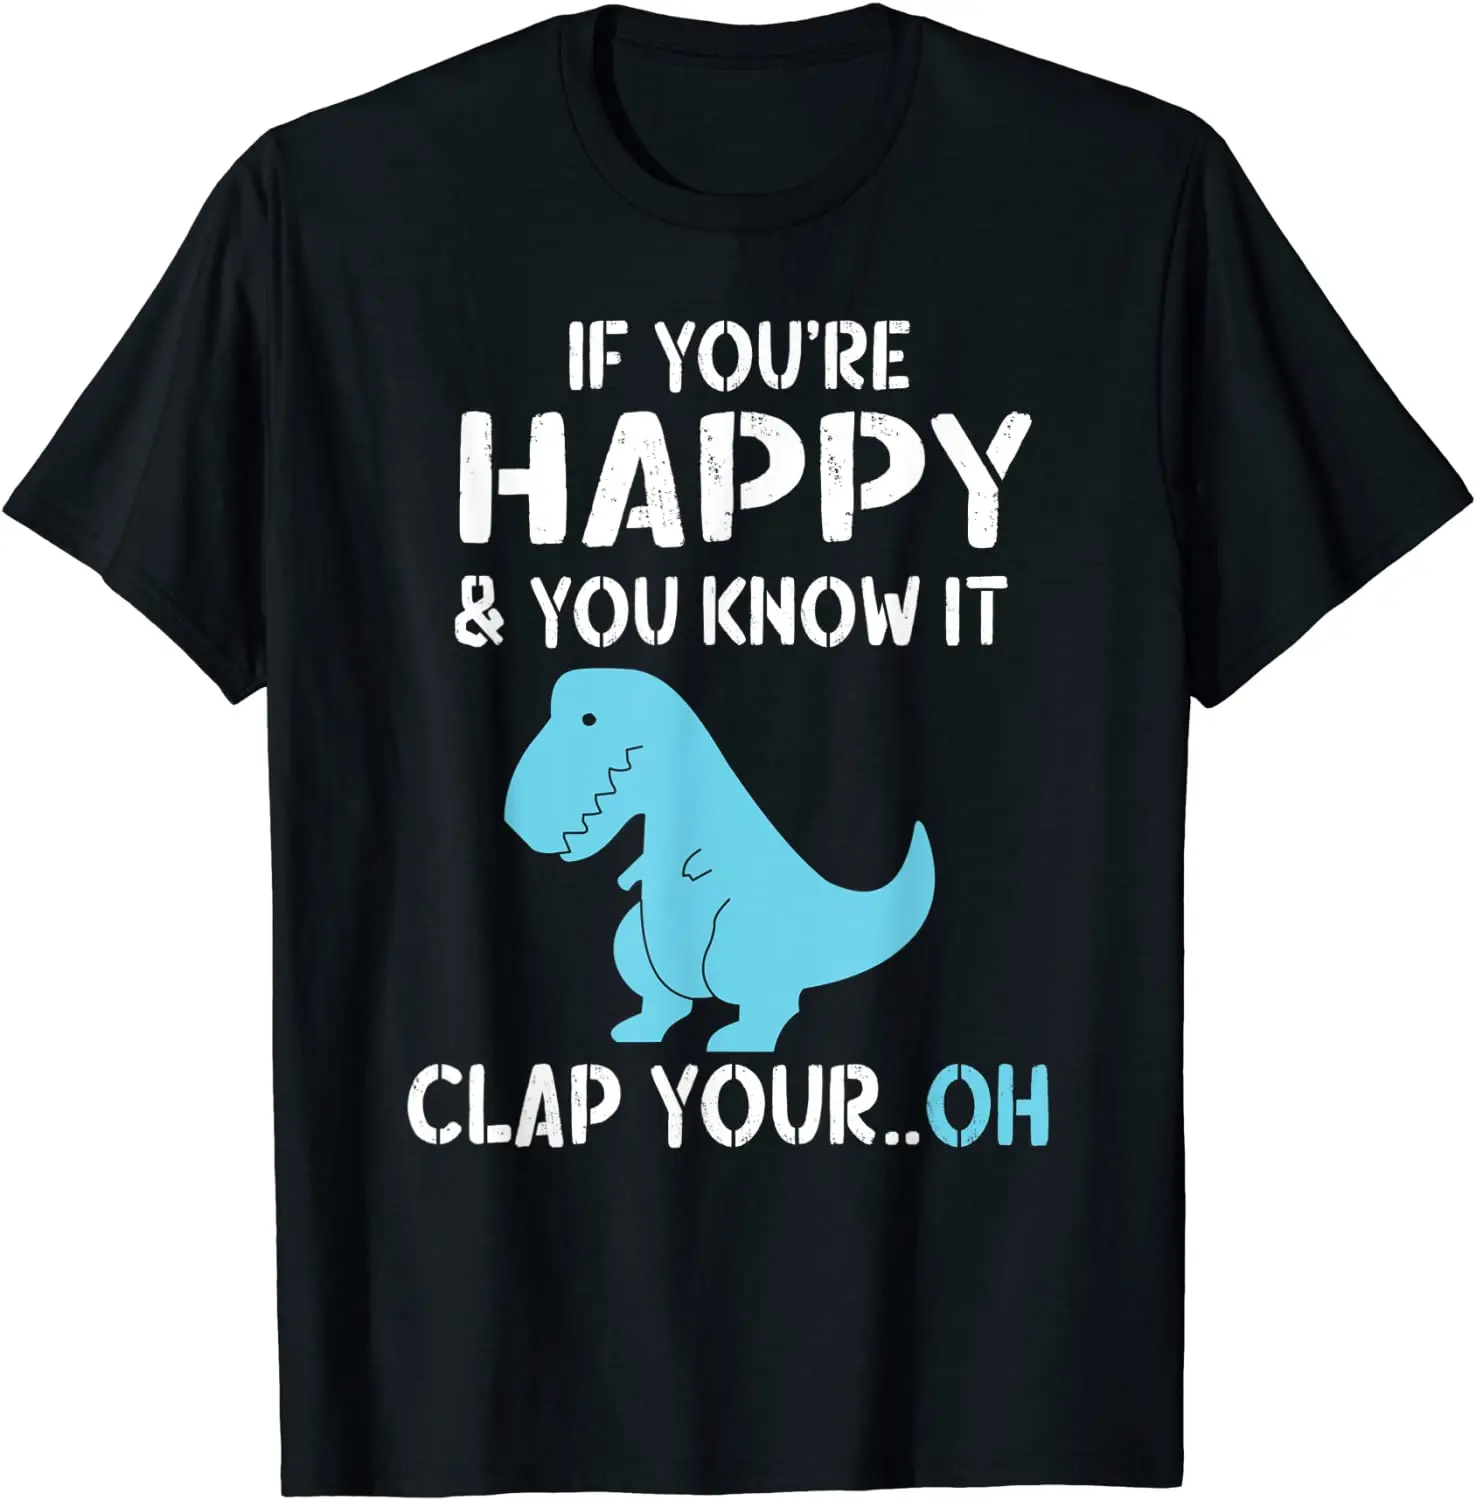 

T Rex If You're Happy and You Know It Clap Your Oh - Dino T-Shirt New Design Top T-shirts Cotton Men's Tops Shirt On